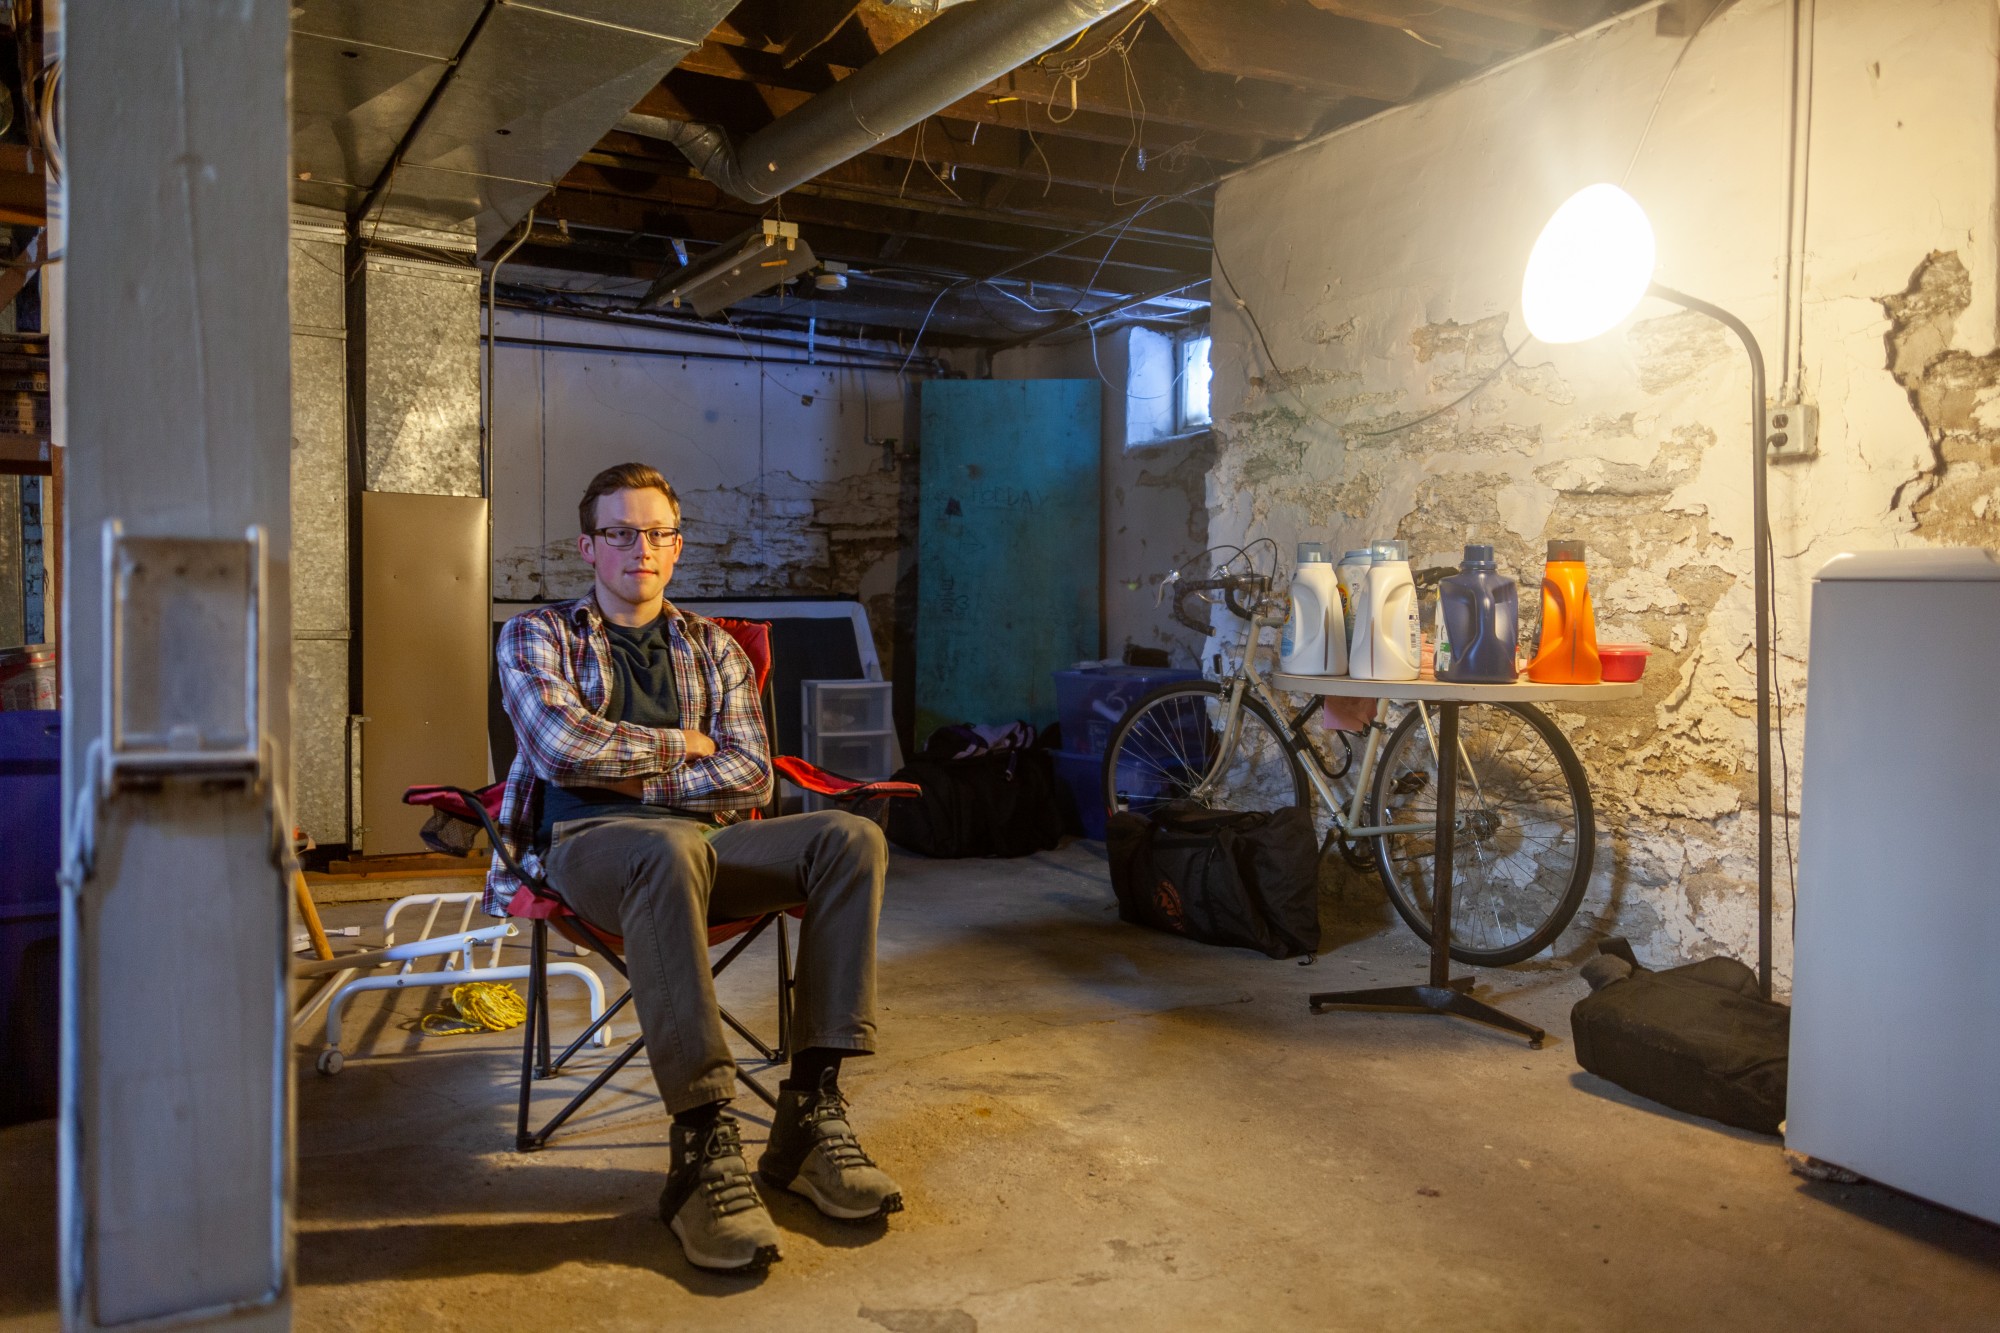 Senior Garrett Williams poses for a portrait in the basement of his former residence in the Como Neighborhood on Saturday, Feb. 8.  The Miles Realty property, where Williams lived for his junior year, suffered from a lack of maintenance, with issues sometimes taking months to resolve.